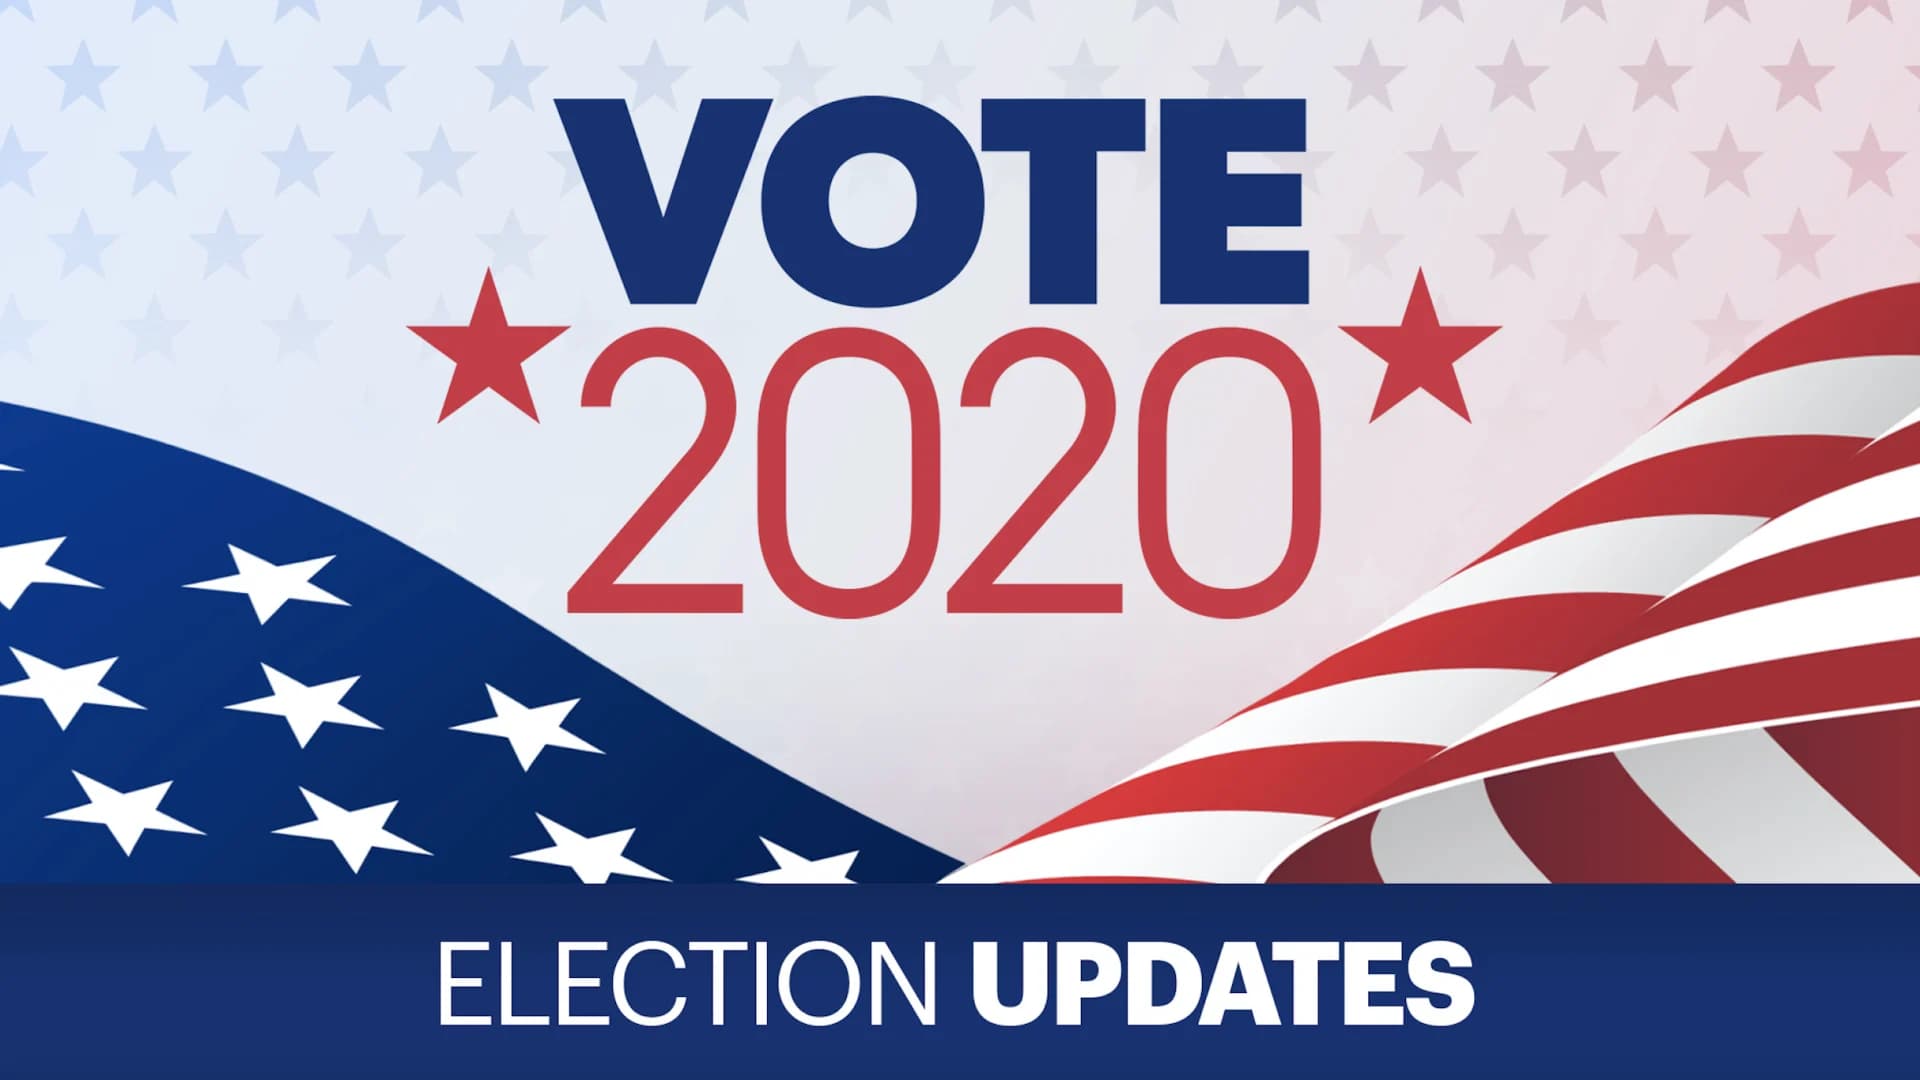 Vote 2020 Live Updates and Complete Election Results - News 12 Westchester/News 12 Hudson Valley